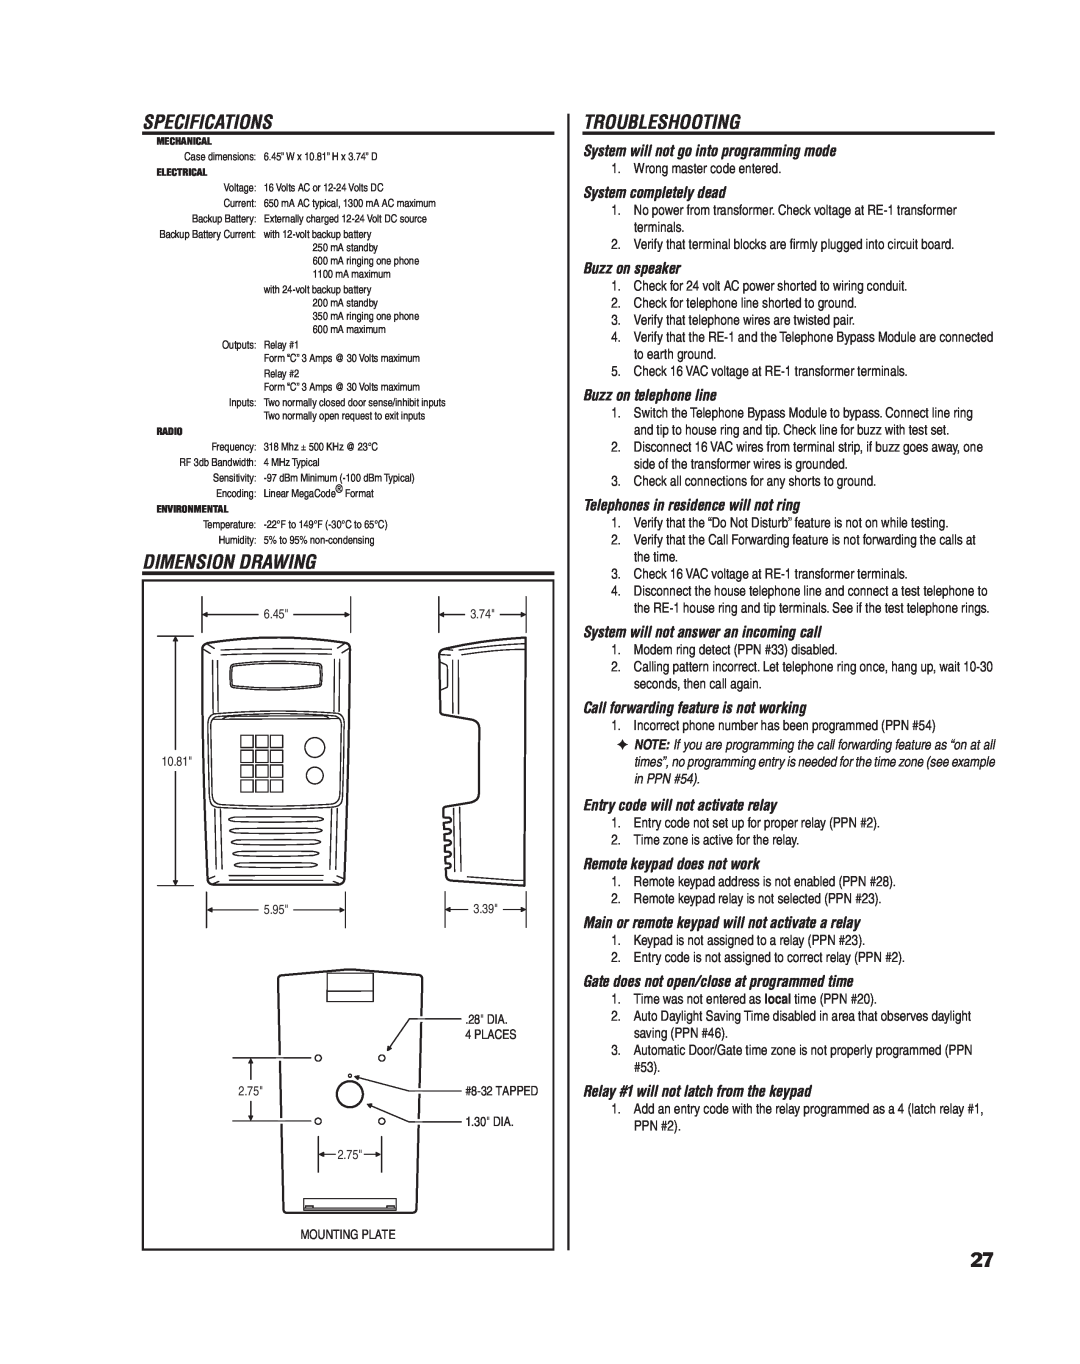 Linear RE-1 manual Specifications, Dimension Drawing, Troubleshooting 